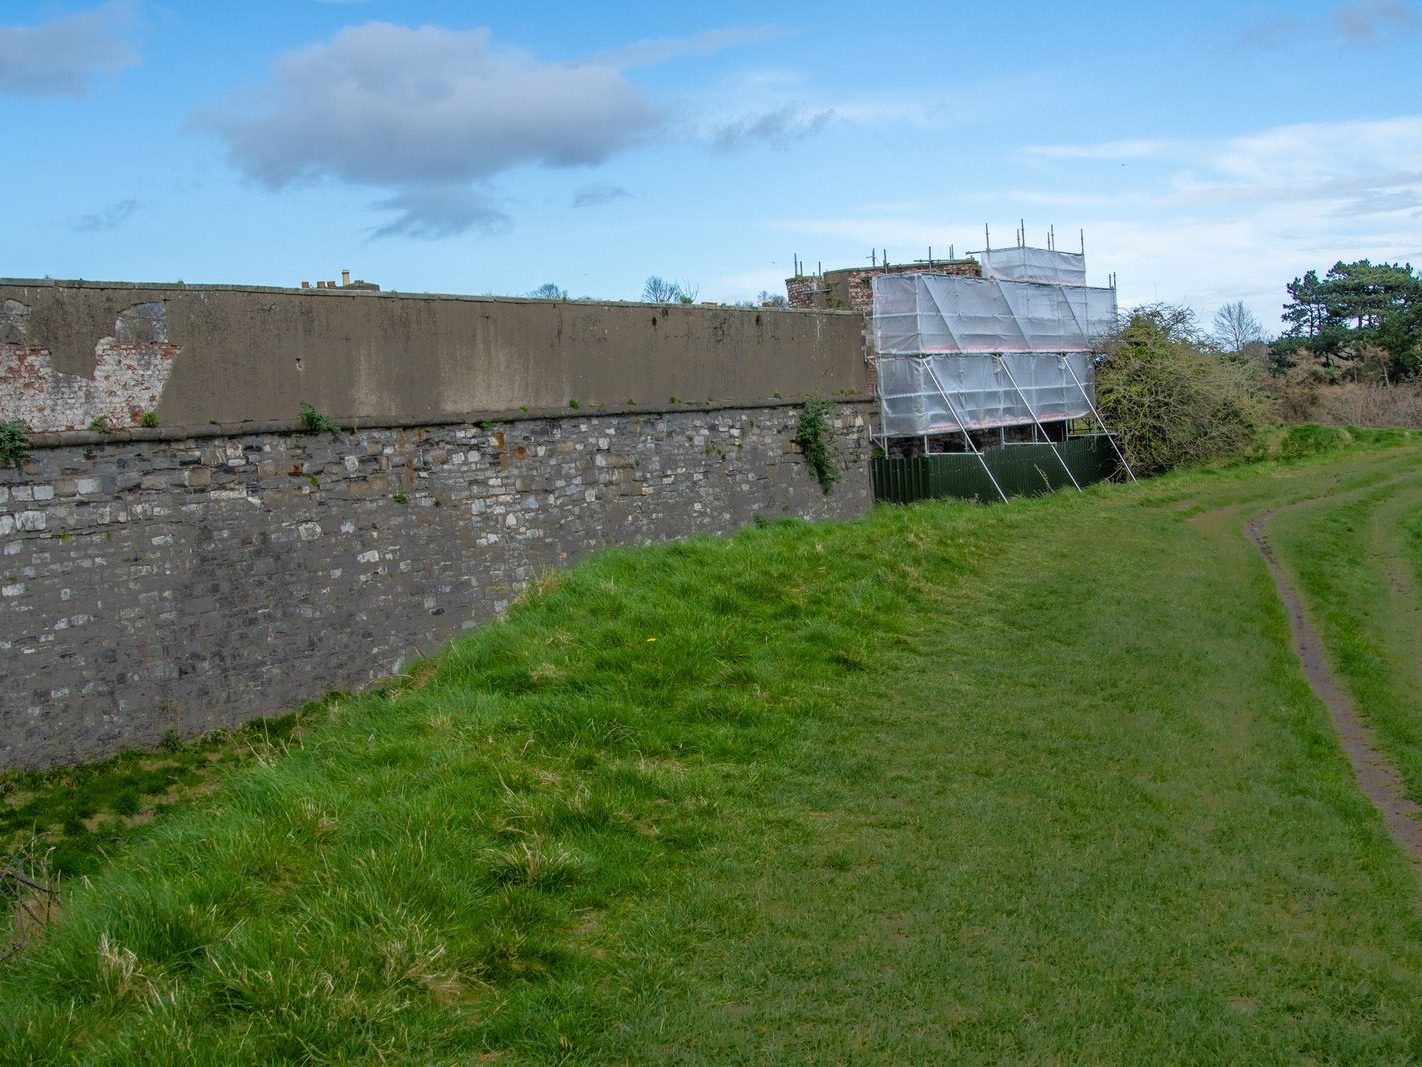 THE MAGAZINE FORT IN PHOENIX PARK [THERE IS MUCH INFORMATION AND A COMPLICATED STORY]-223505-1